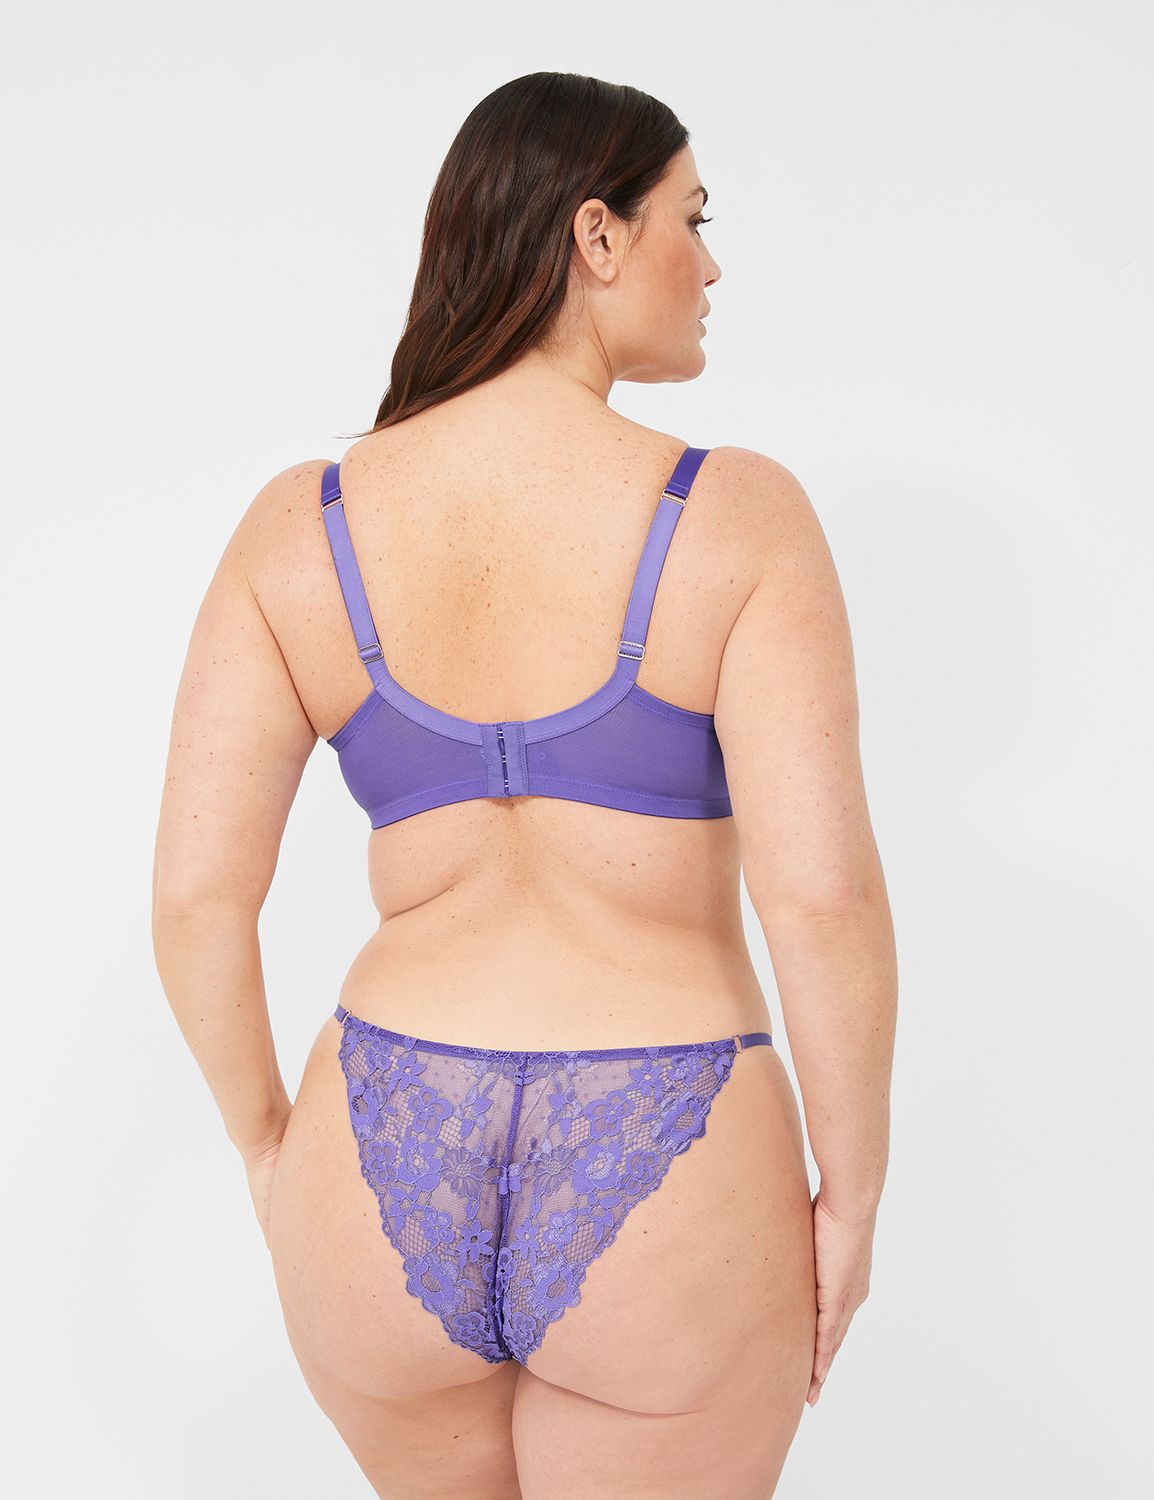 Busted Bra Shop - The Panache Quinn Balconnet Bra oozes luxury and